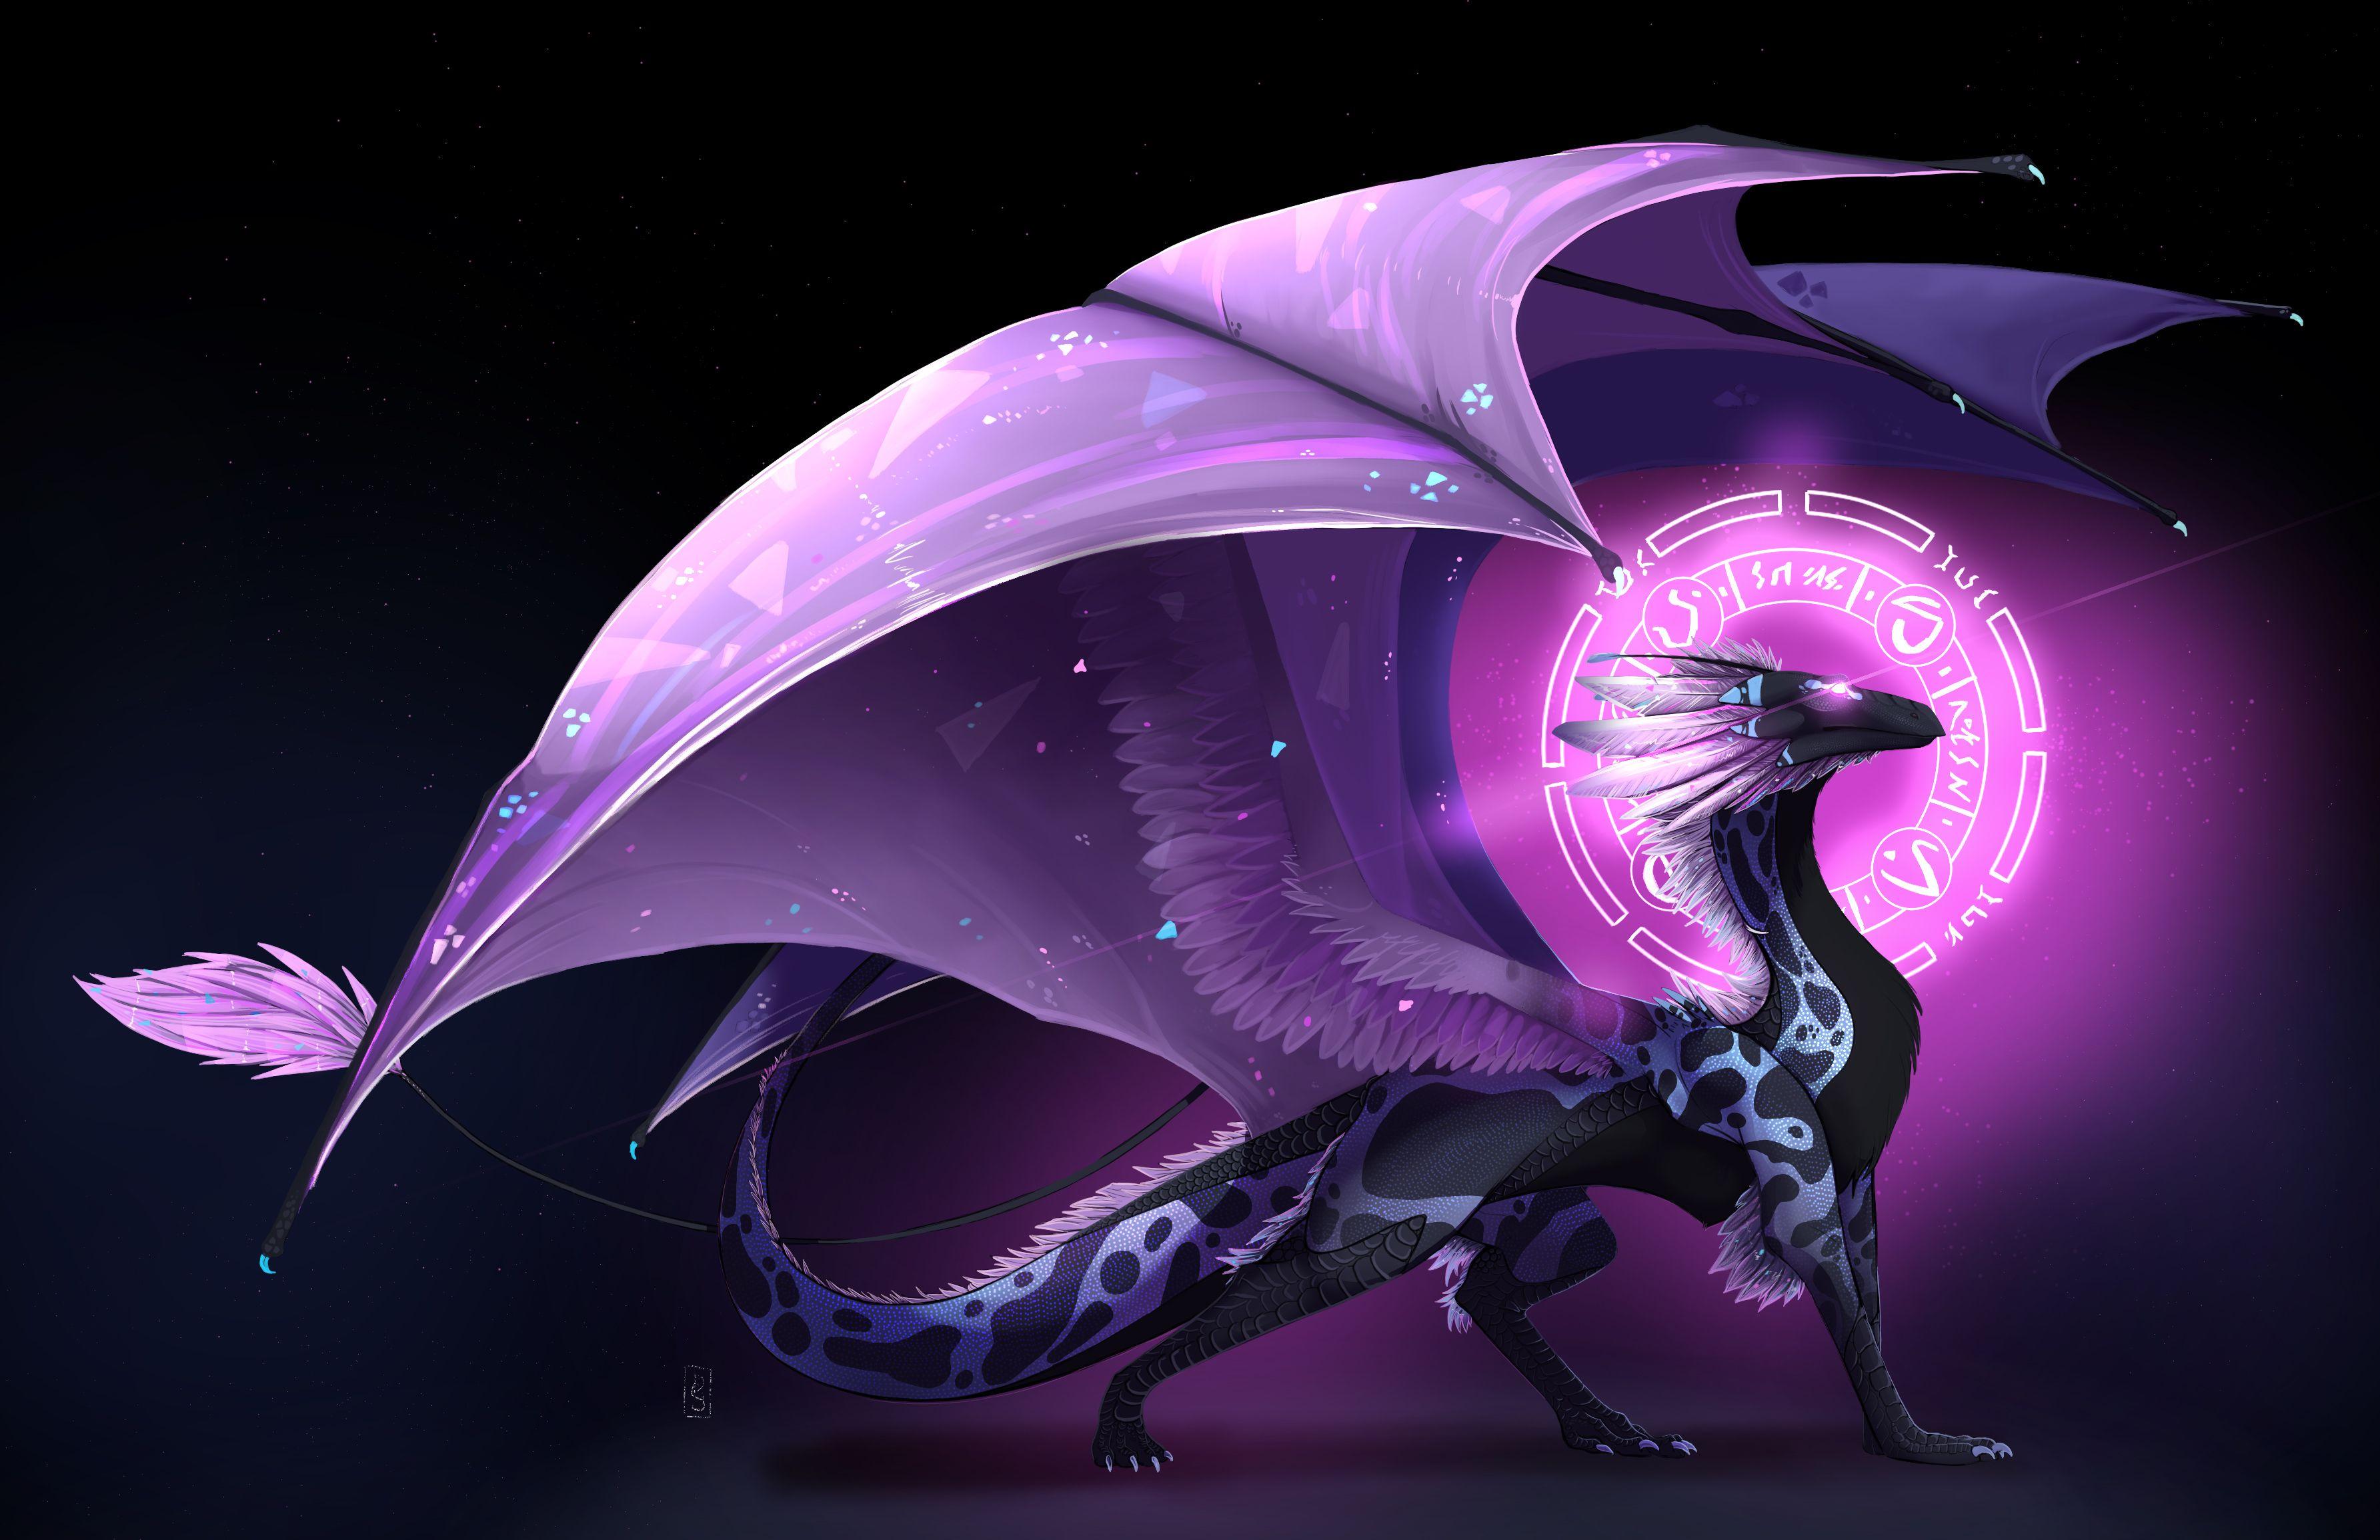 Download wallpaper 840x1160 toothless and light fury romantic love  dragons iphone 4 iphone 4s ipod touch 840x1160 hd background 15368